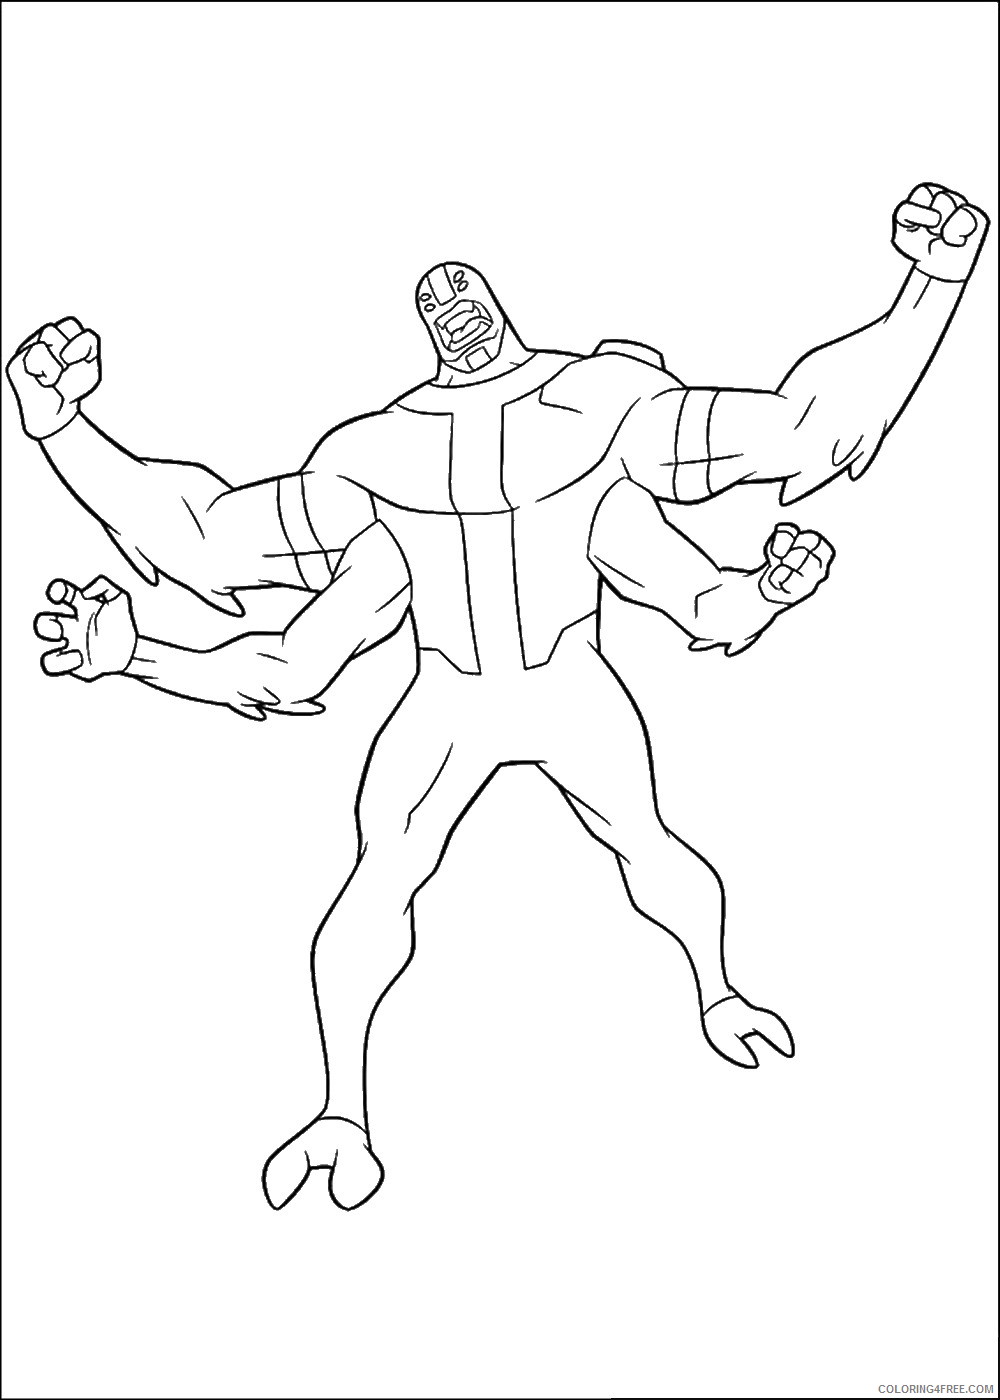 Ben 10 Coloring Pages Cartoons ben10 57 Printable 2020 1234 Coloring4free